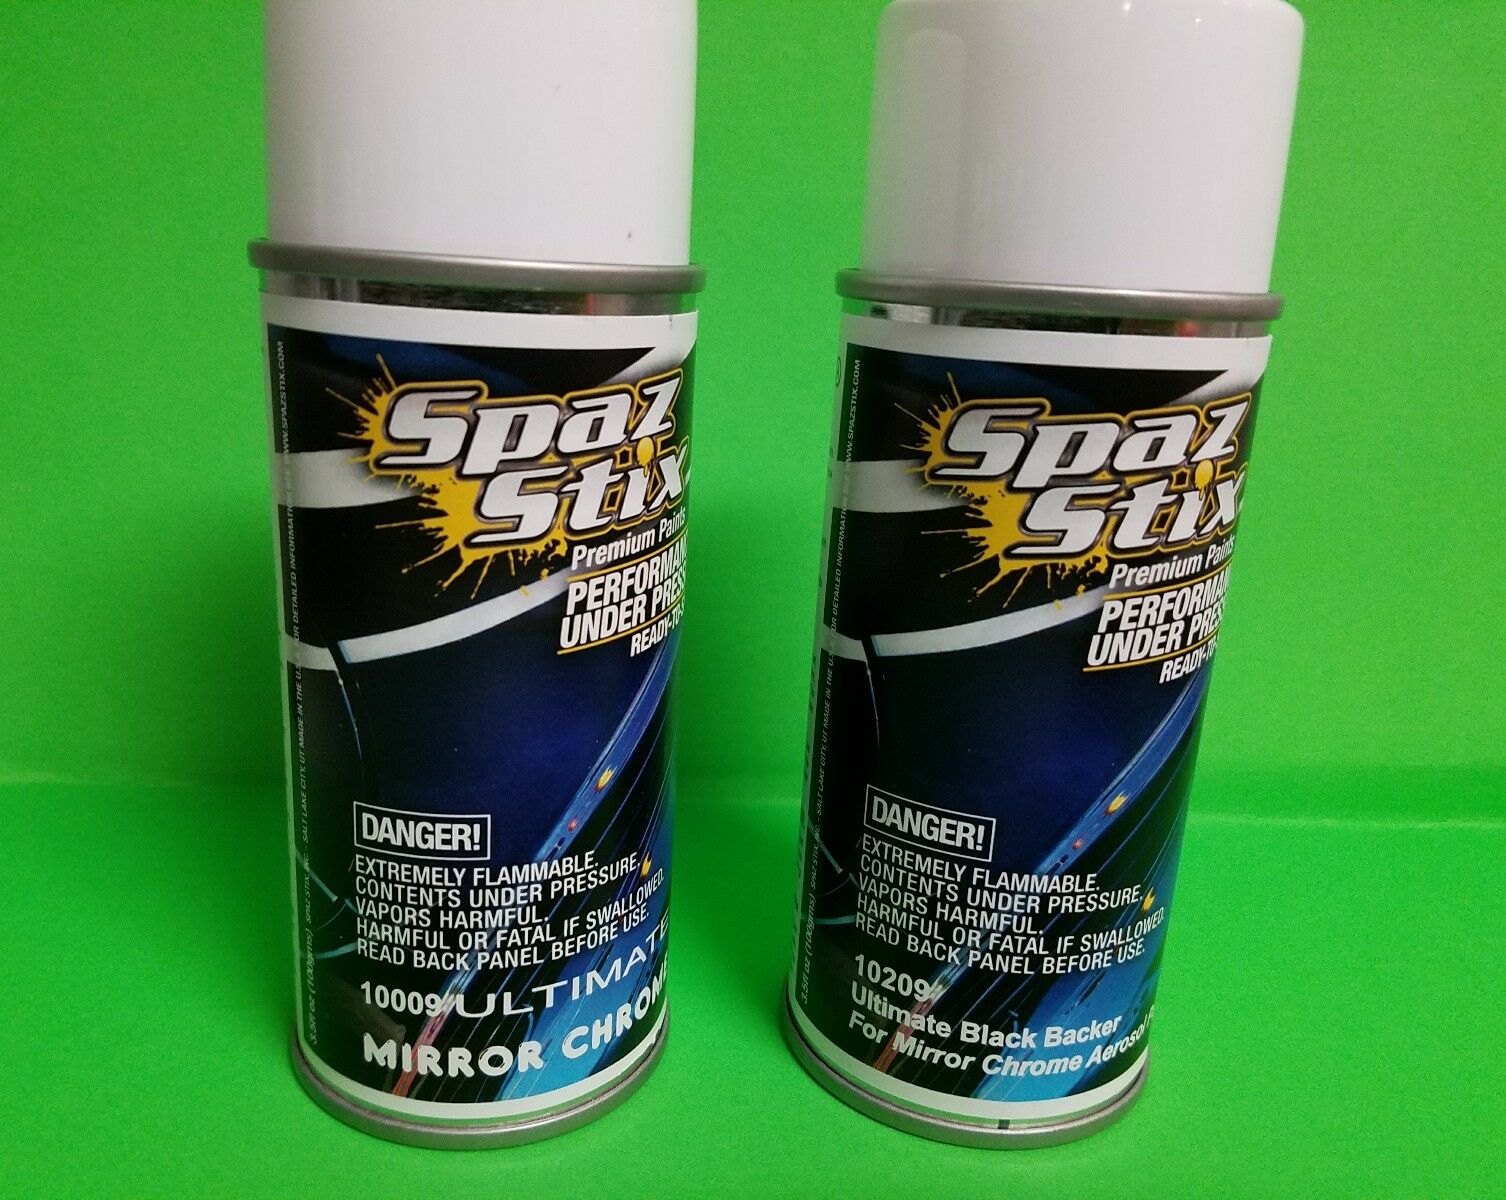 Spaz Stix Ultimate Mirror Chrome AND  BLACK BACKER  Combo Deal Spray Cans 3.5oz.